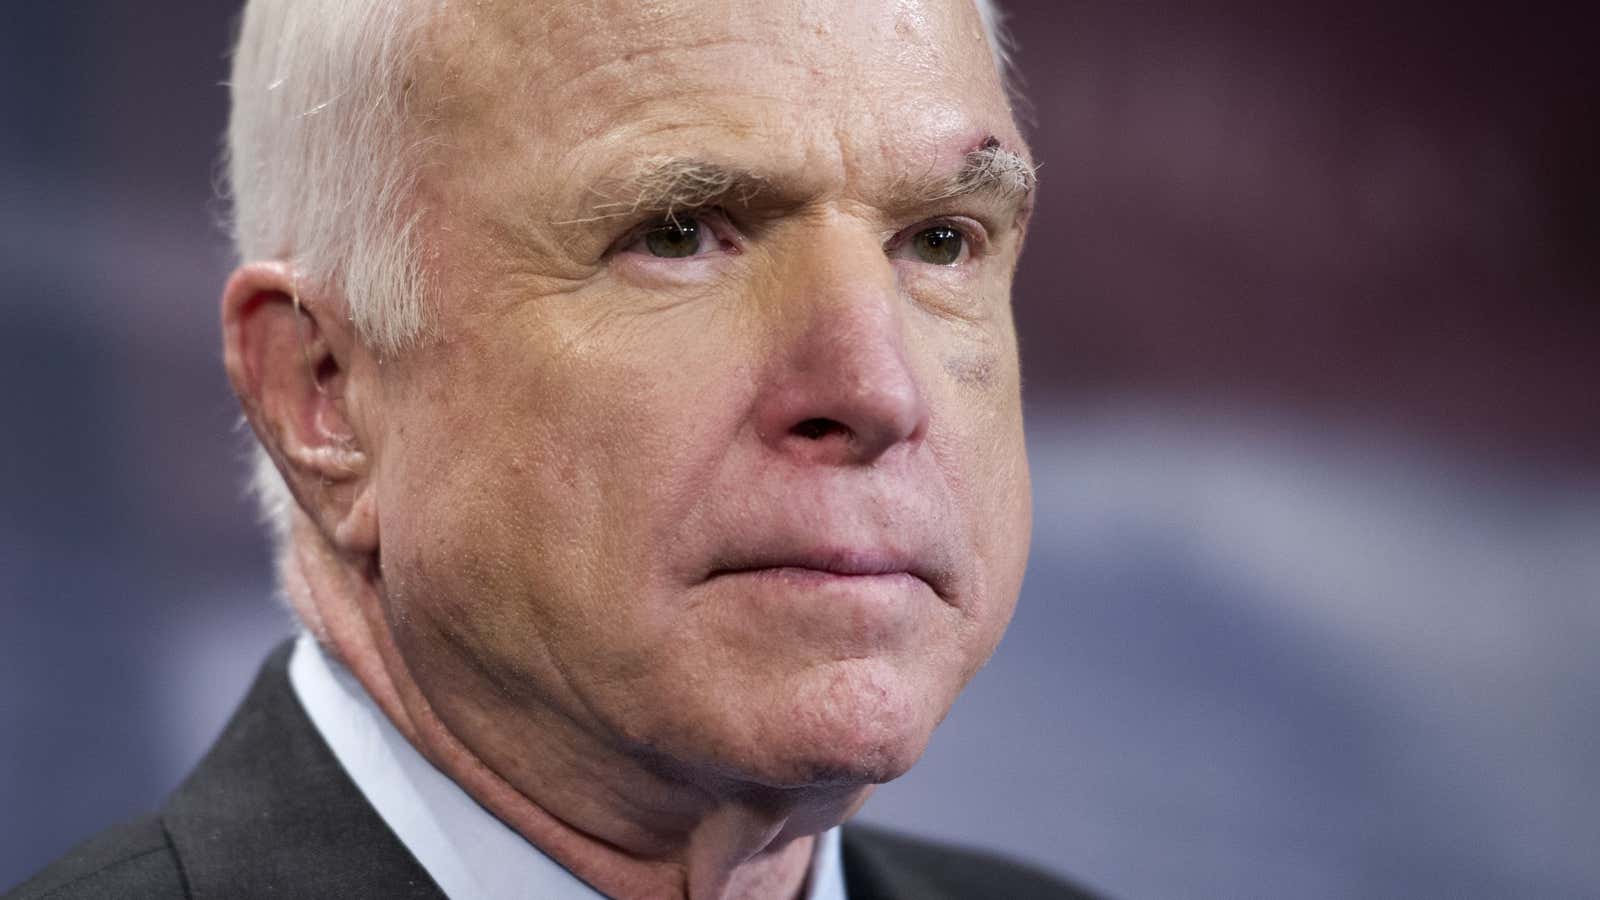 John McCain was centerstage in a political drama surrounding the proposed Obamacare repeal.